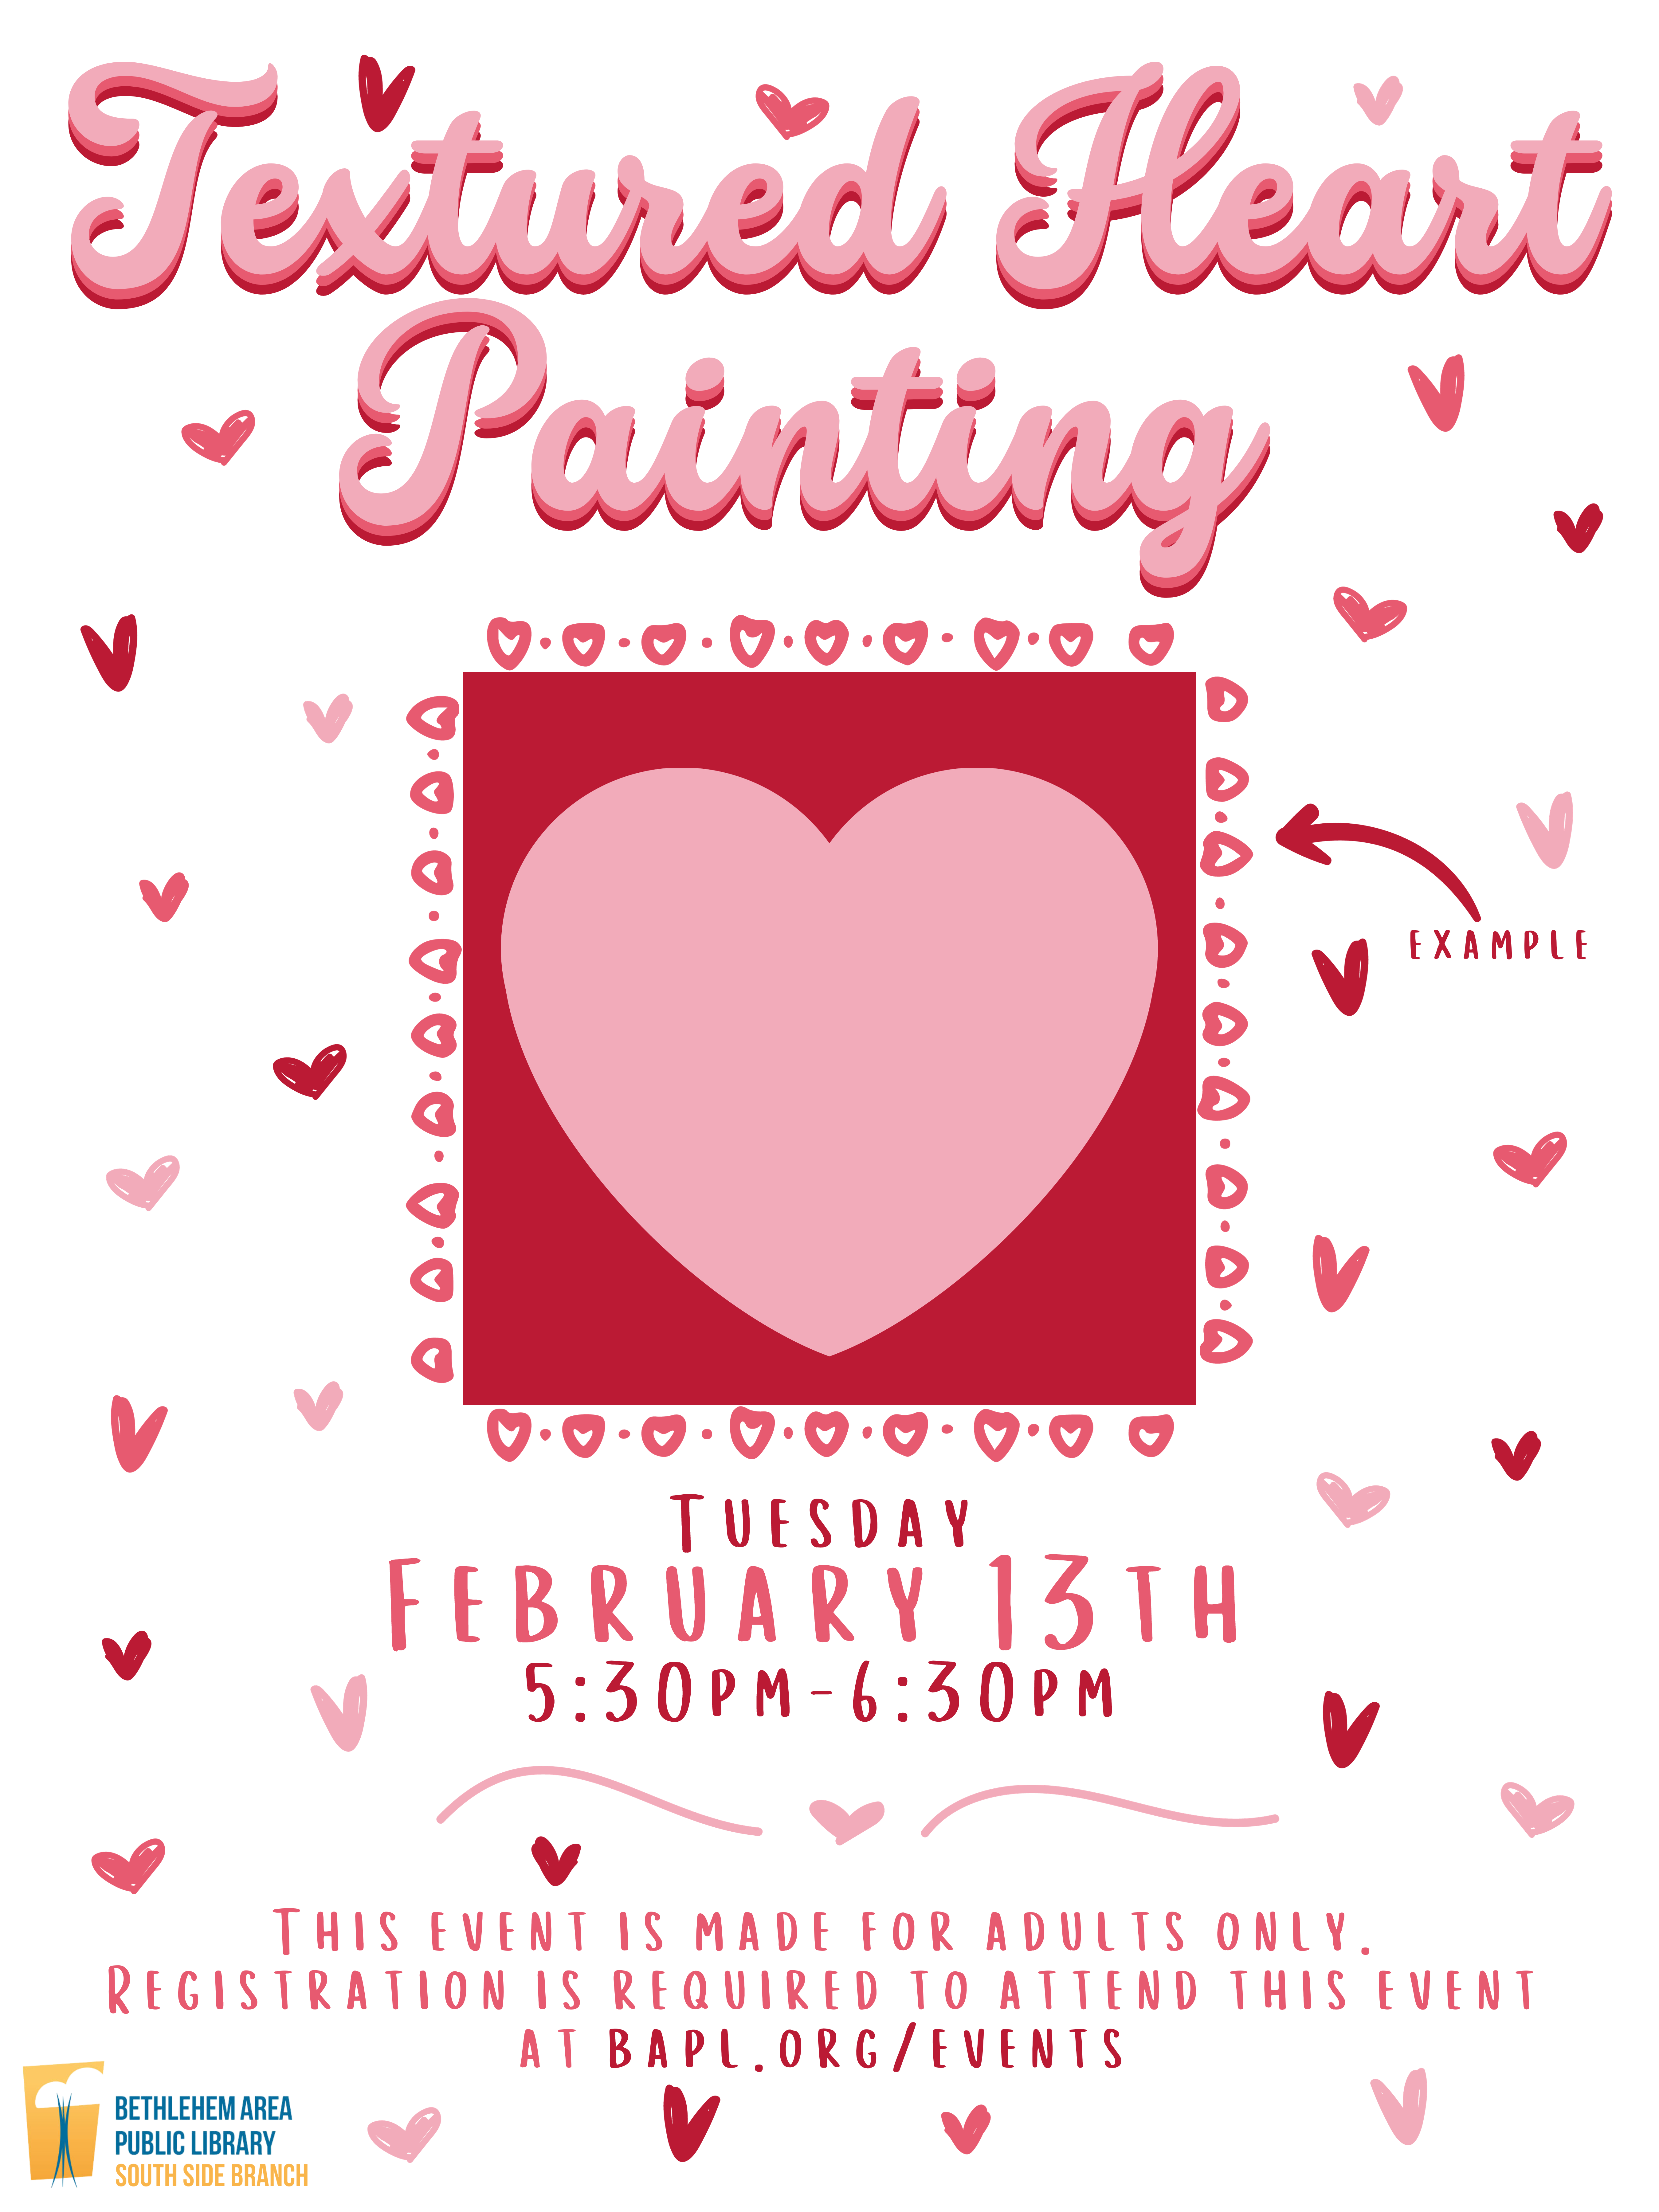 Poster that reads textured heart painting with the date February 13th 2023 at 5:30pm. Registration is required at bapl.org/events. The poster is red and pink with tiny hearts surounding a larger heart in the center.